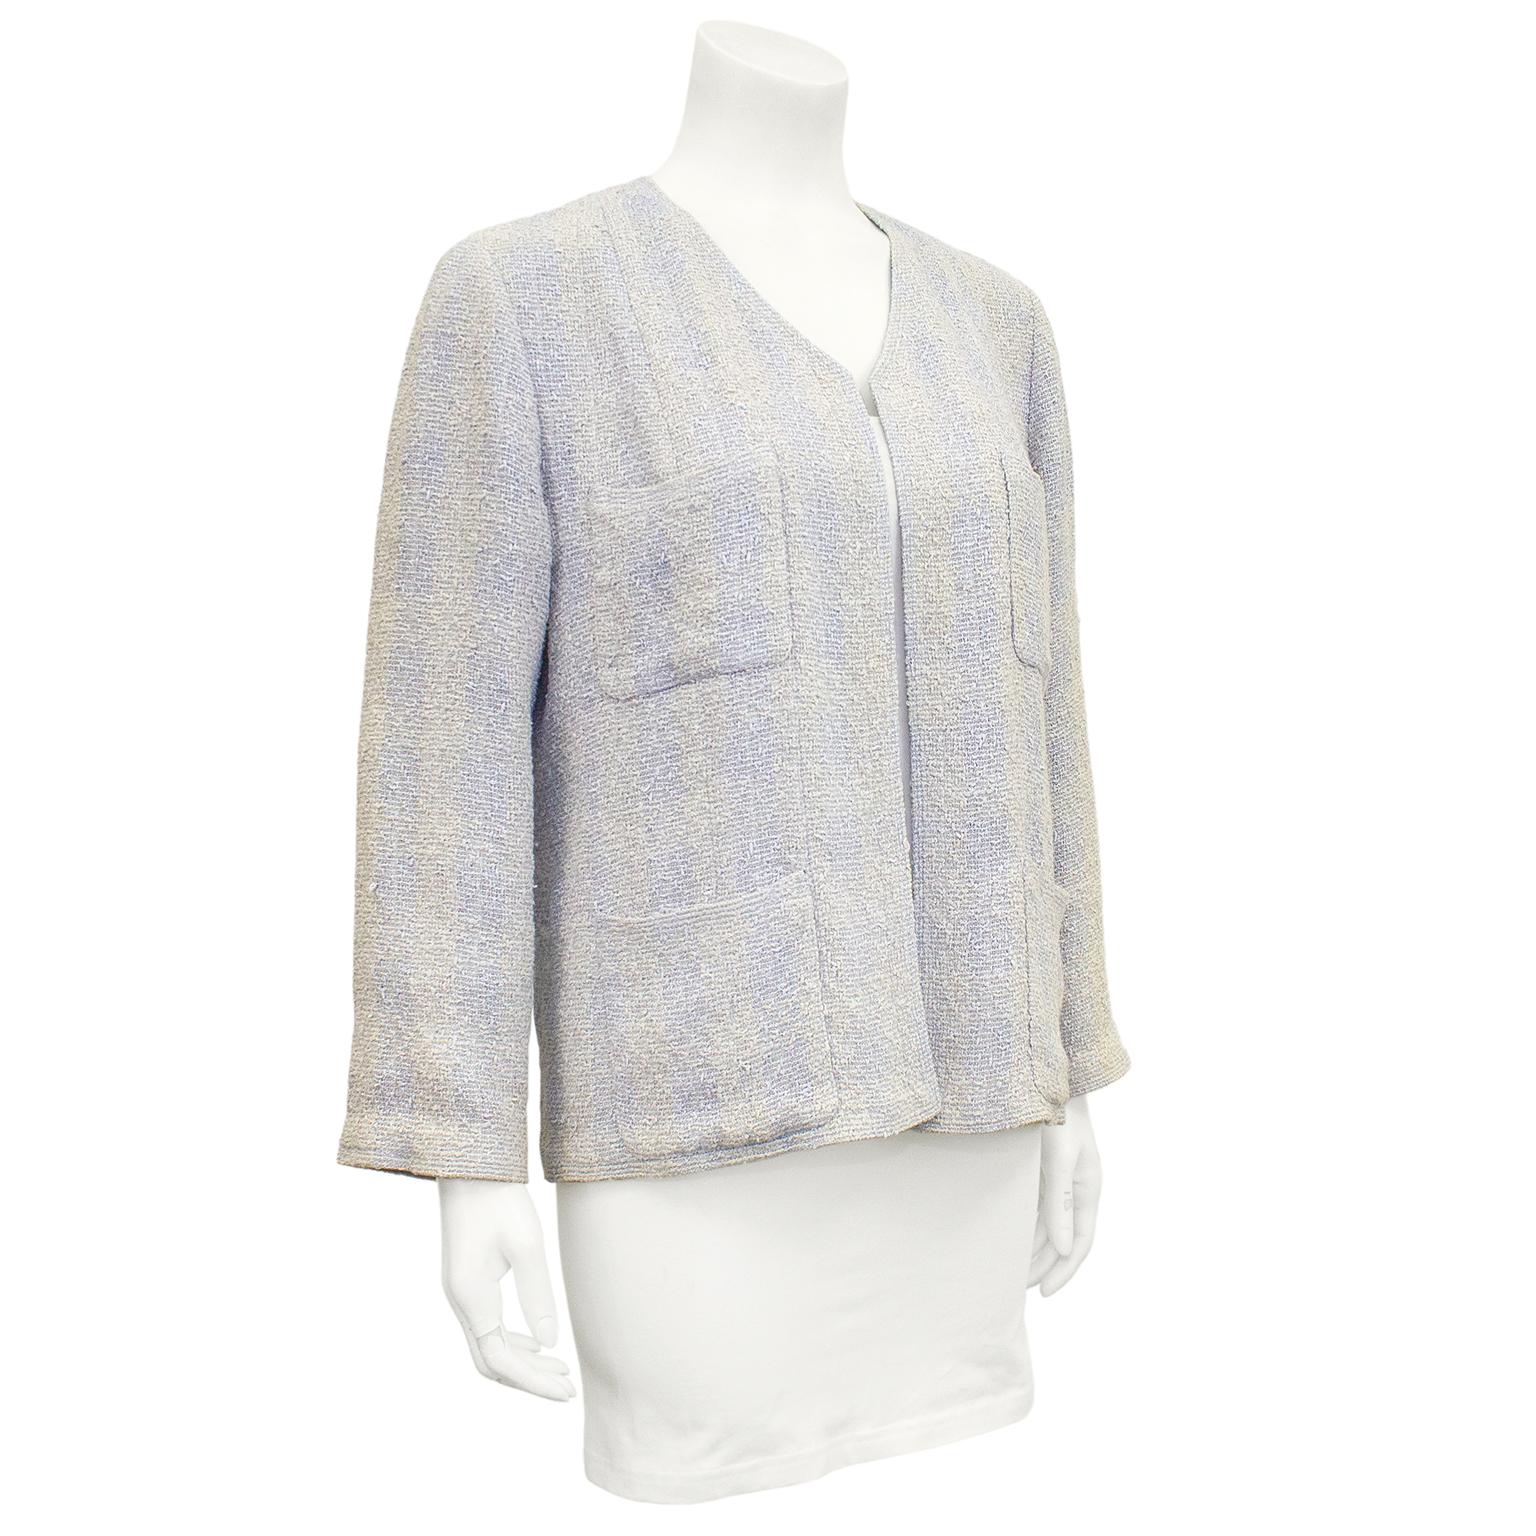 Beautiful Chanel beige and pale blue knit wool tweed ombre jacket from the spring 1999 collection. High v shaped neckline, open front and patch pockets at bust and hips. Loose through body, giving it a more casual vibe. Small silver Chanel plaque at